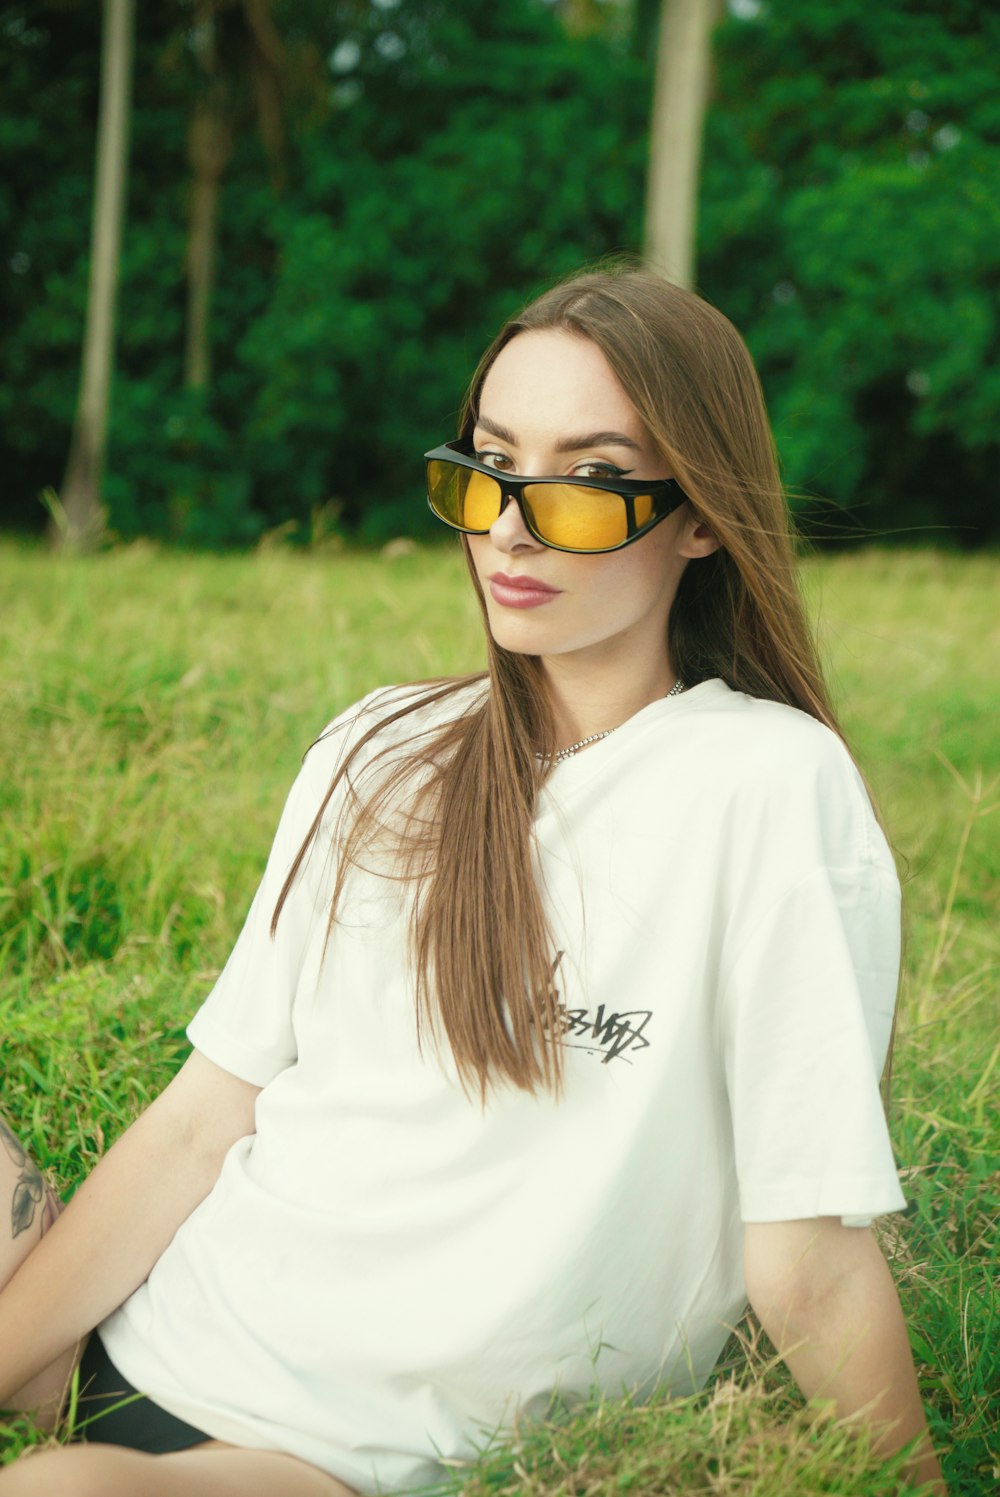 a woman wearing sunglasses sitting in the grass